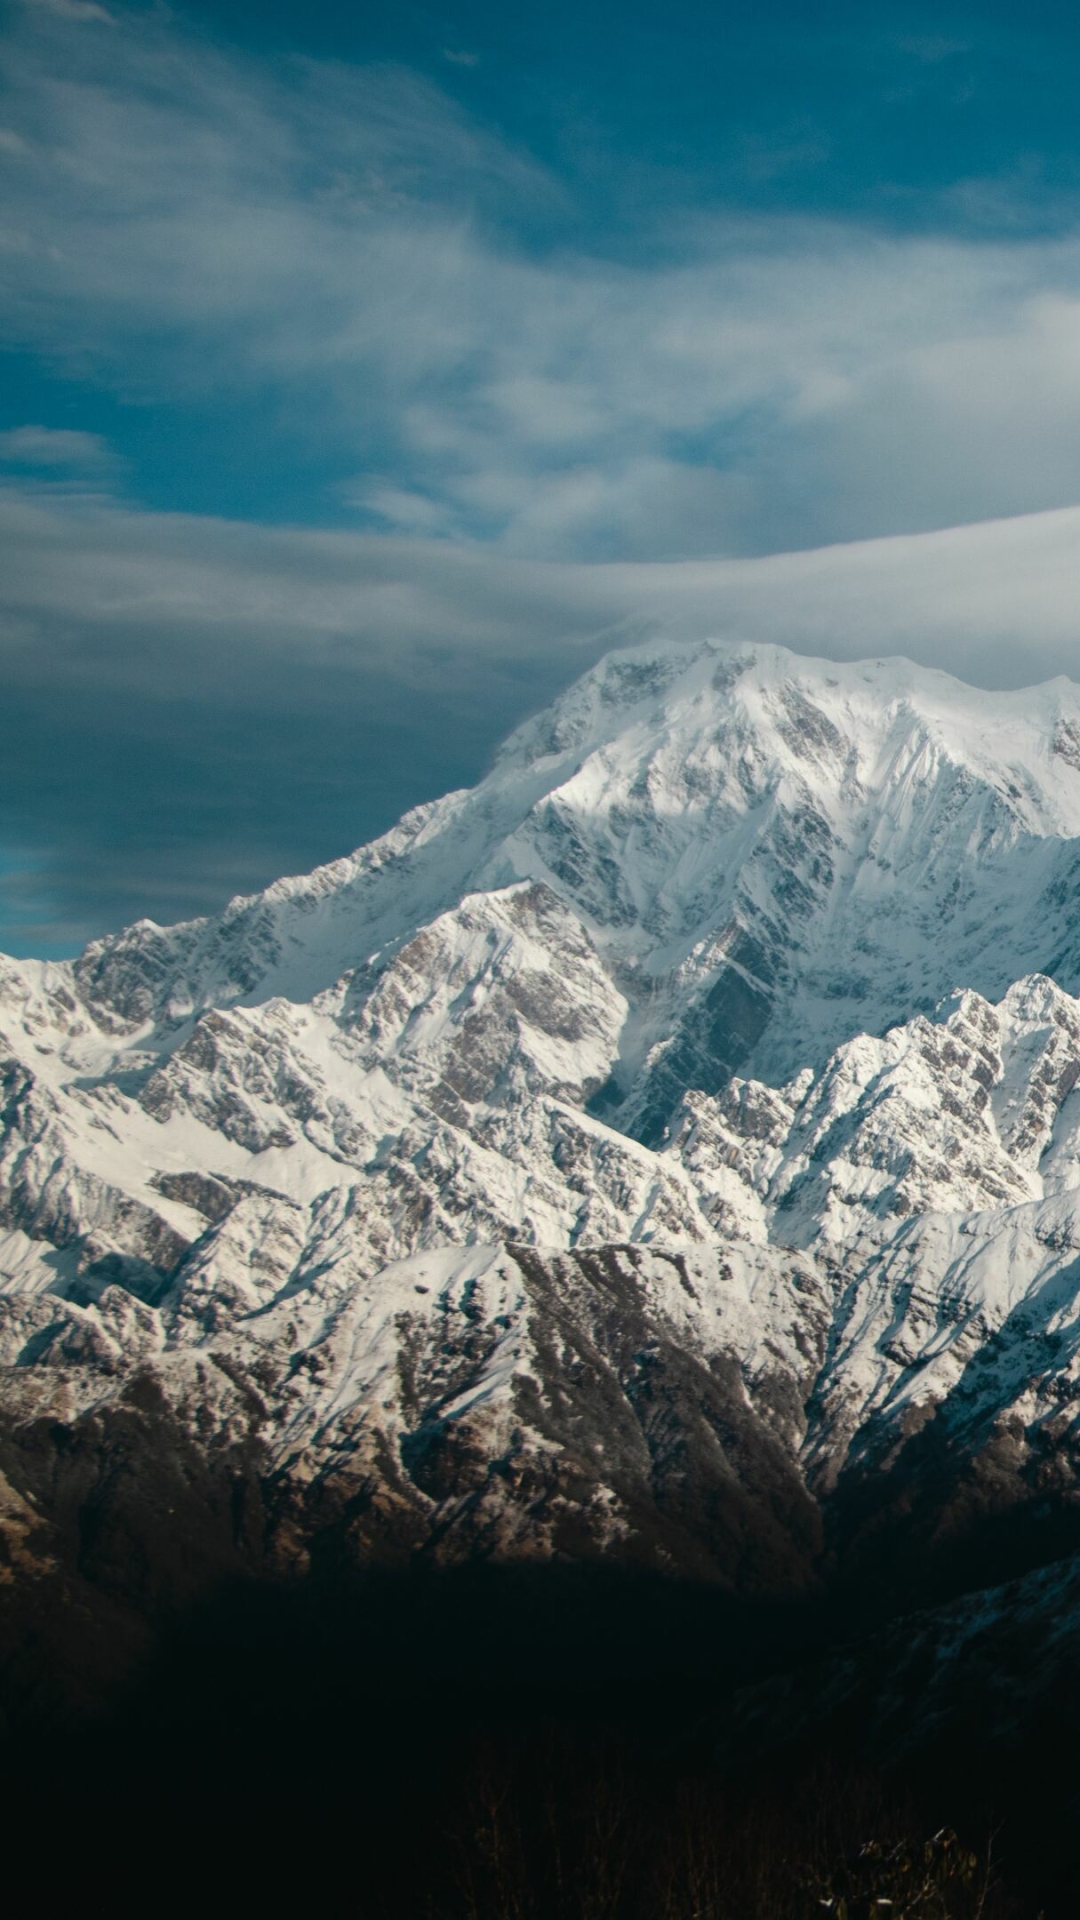 Machapuchare or Fishtail mountain, Nepal by ANJAN